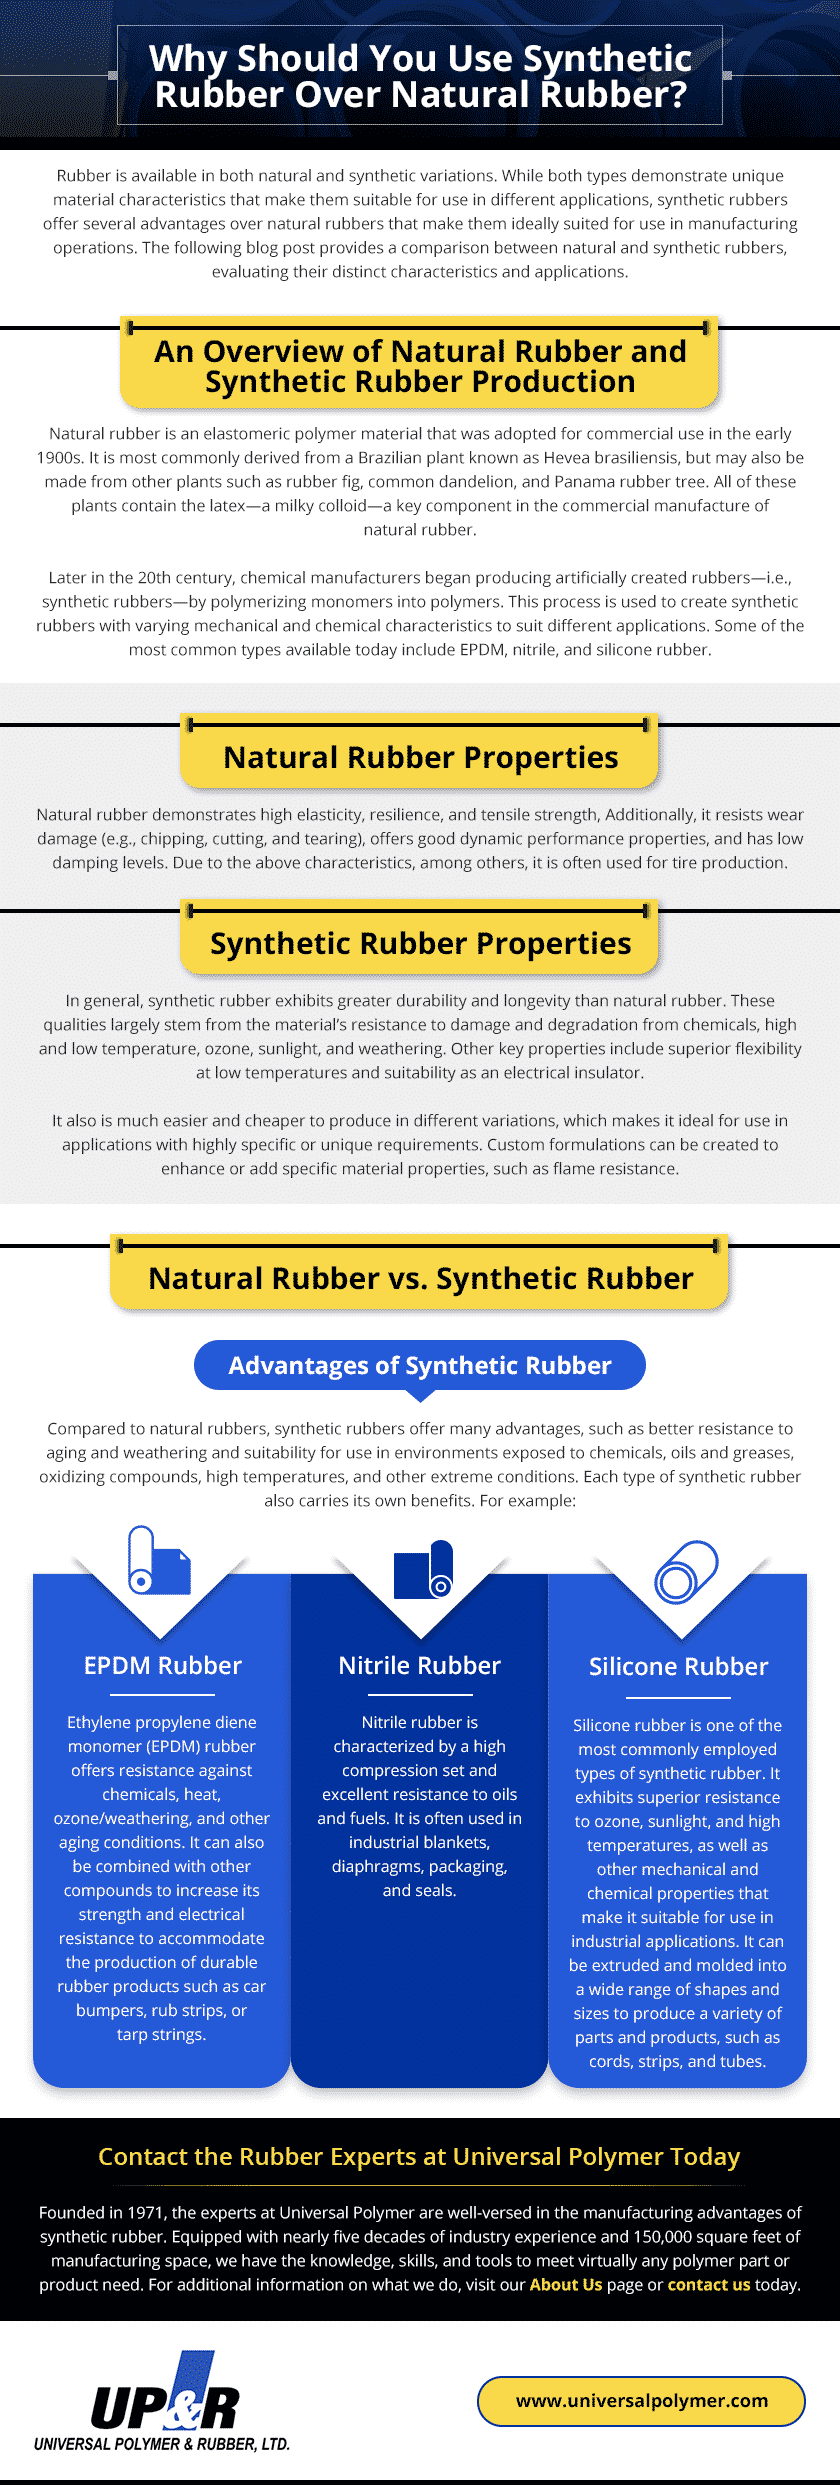 Why Should You Use Synthetic Rubber Over Natural Rubber